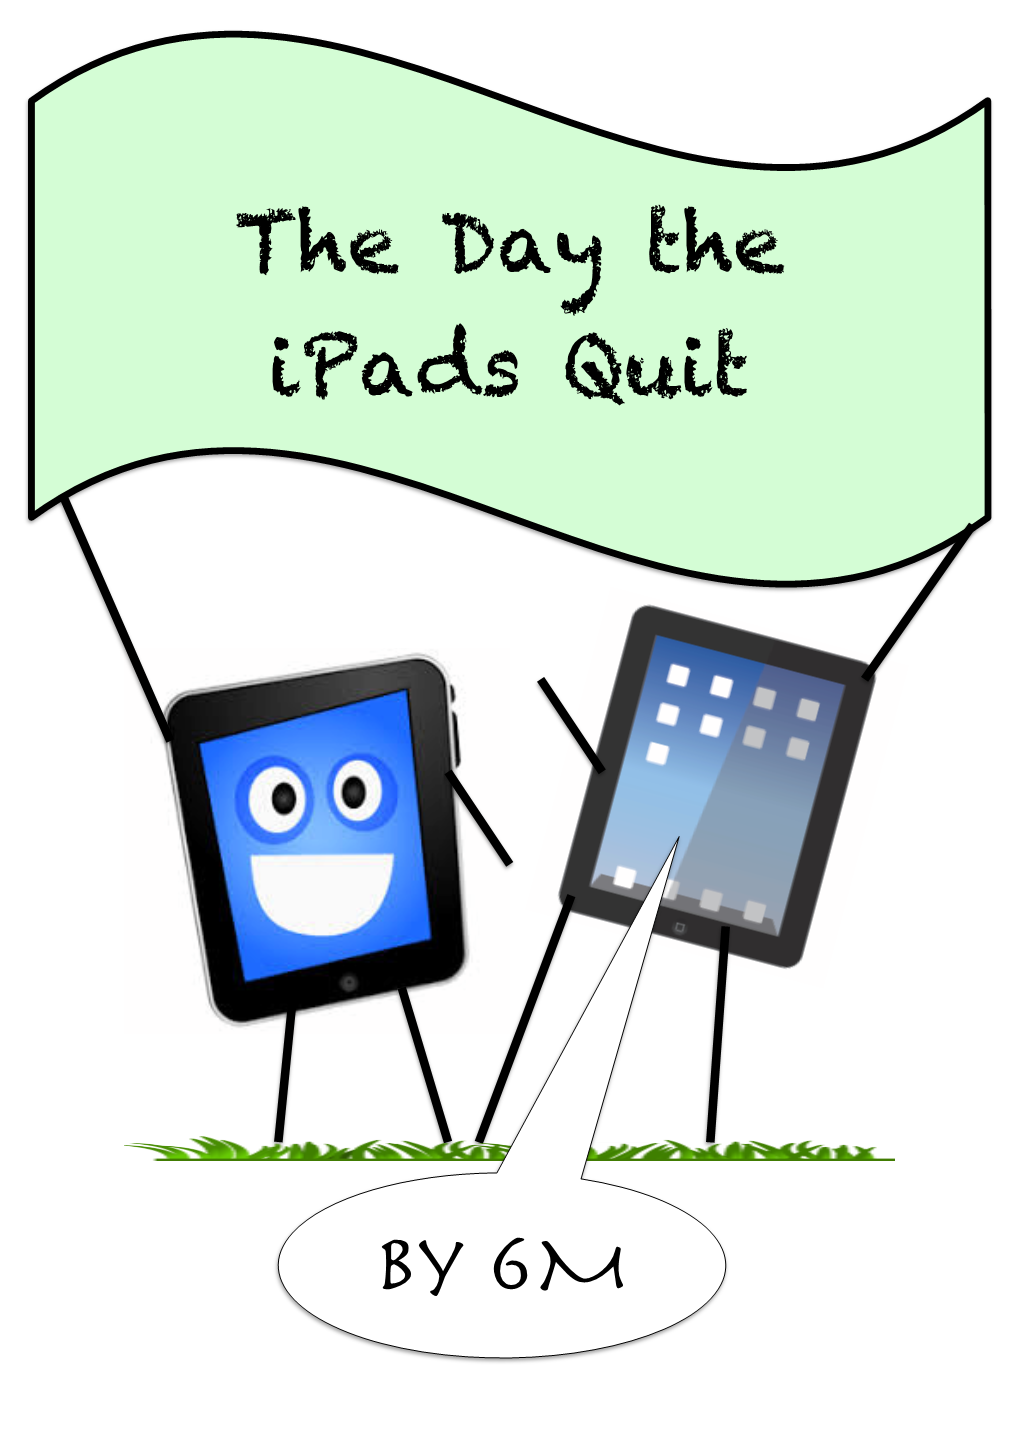 The Day the Ipads Quit by 6M